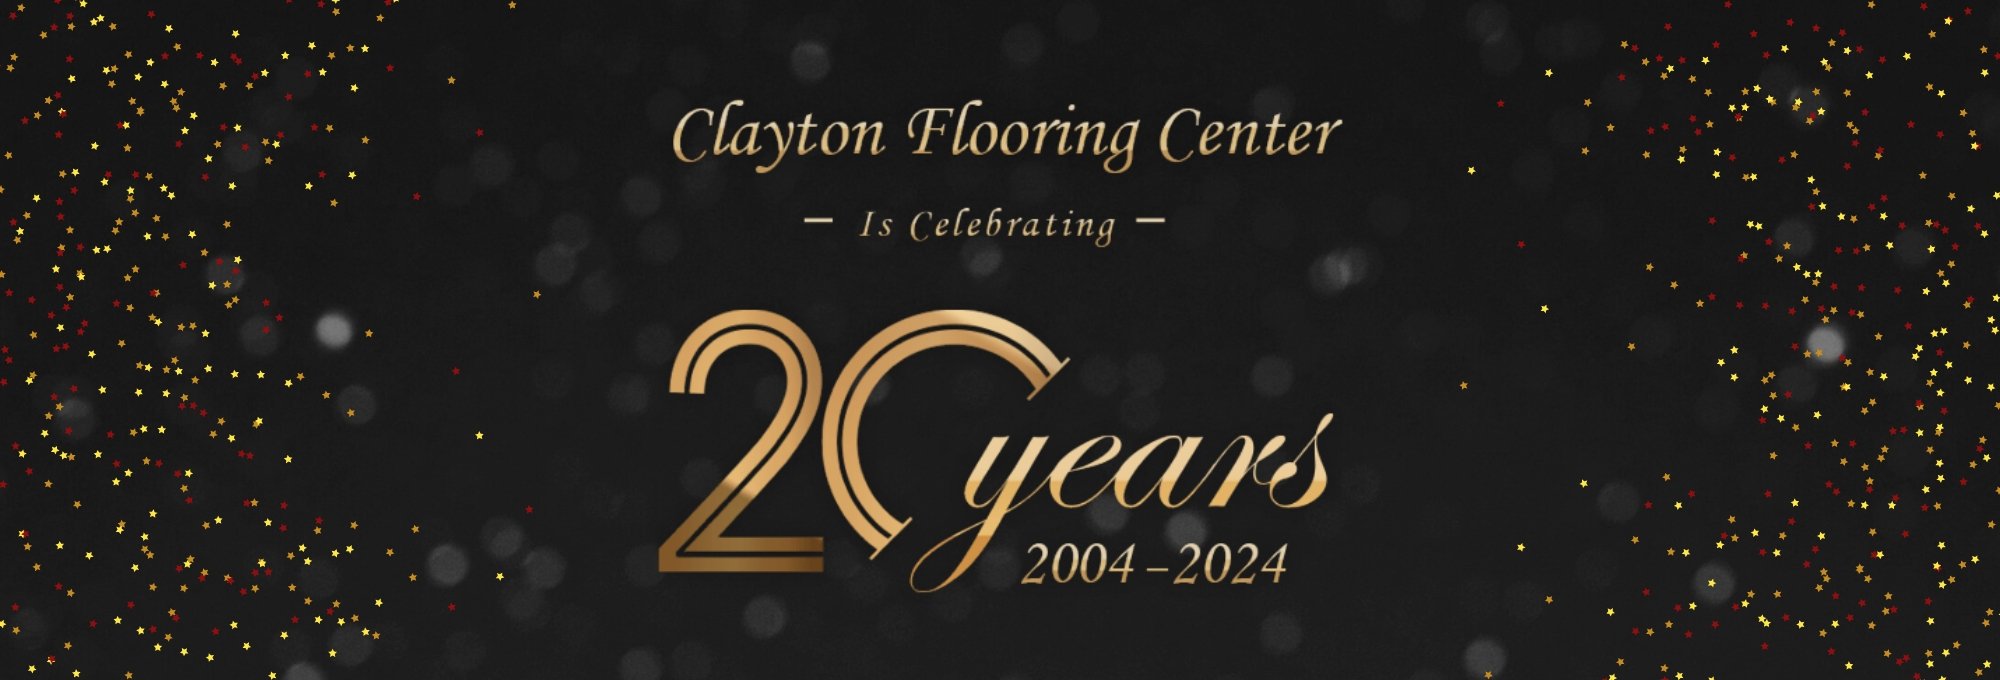 Visit your trusted flooring professionals in the Clayton, NC area